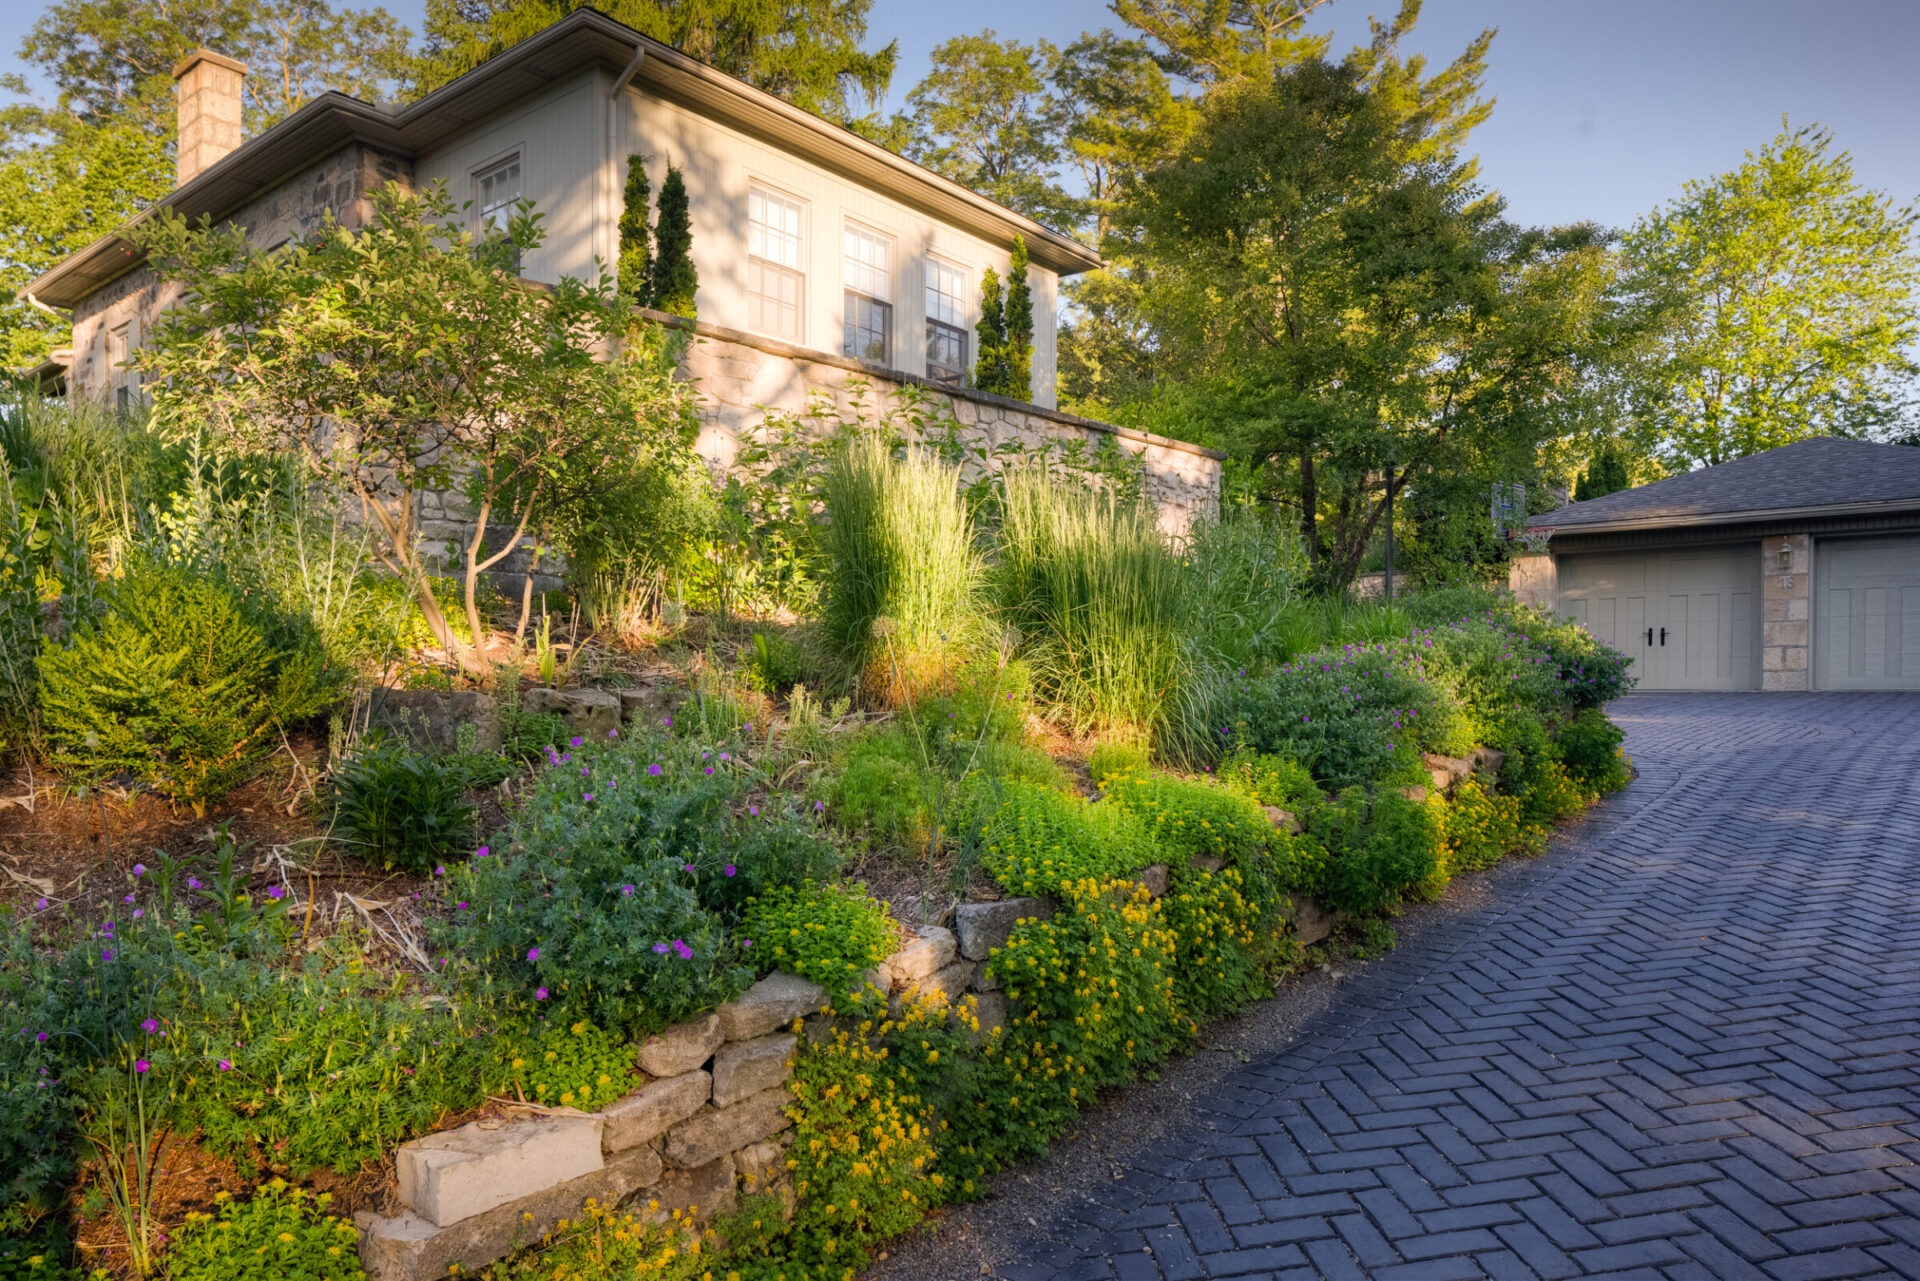 A well-landscaped property with lush gardens and a cobblestone driveway leading to a detached garage, adjacent to a house with stone accents.